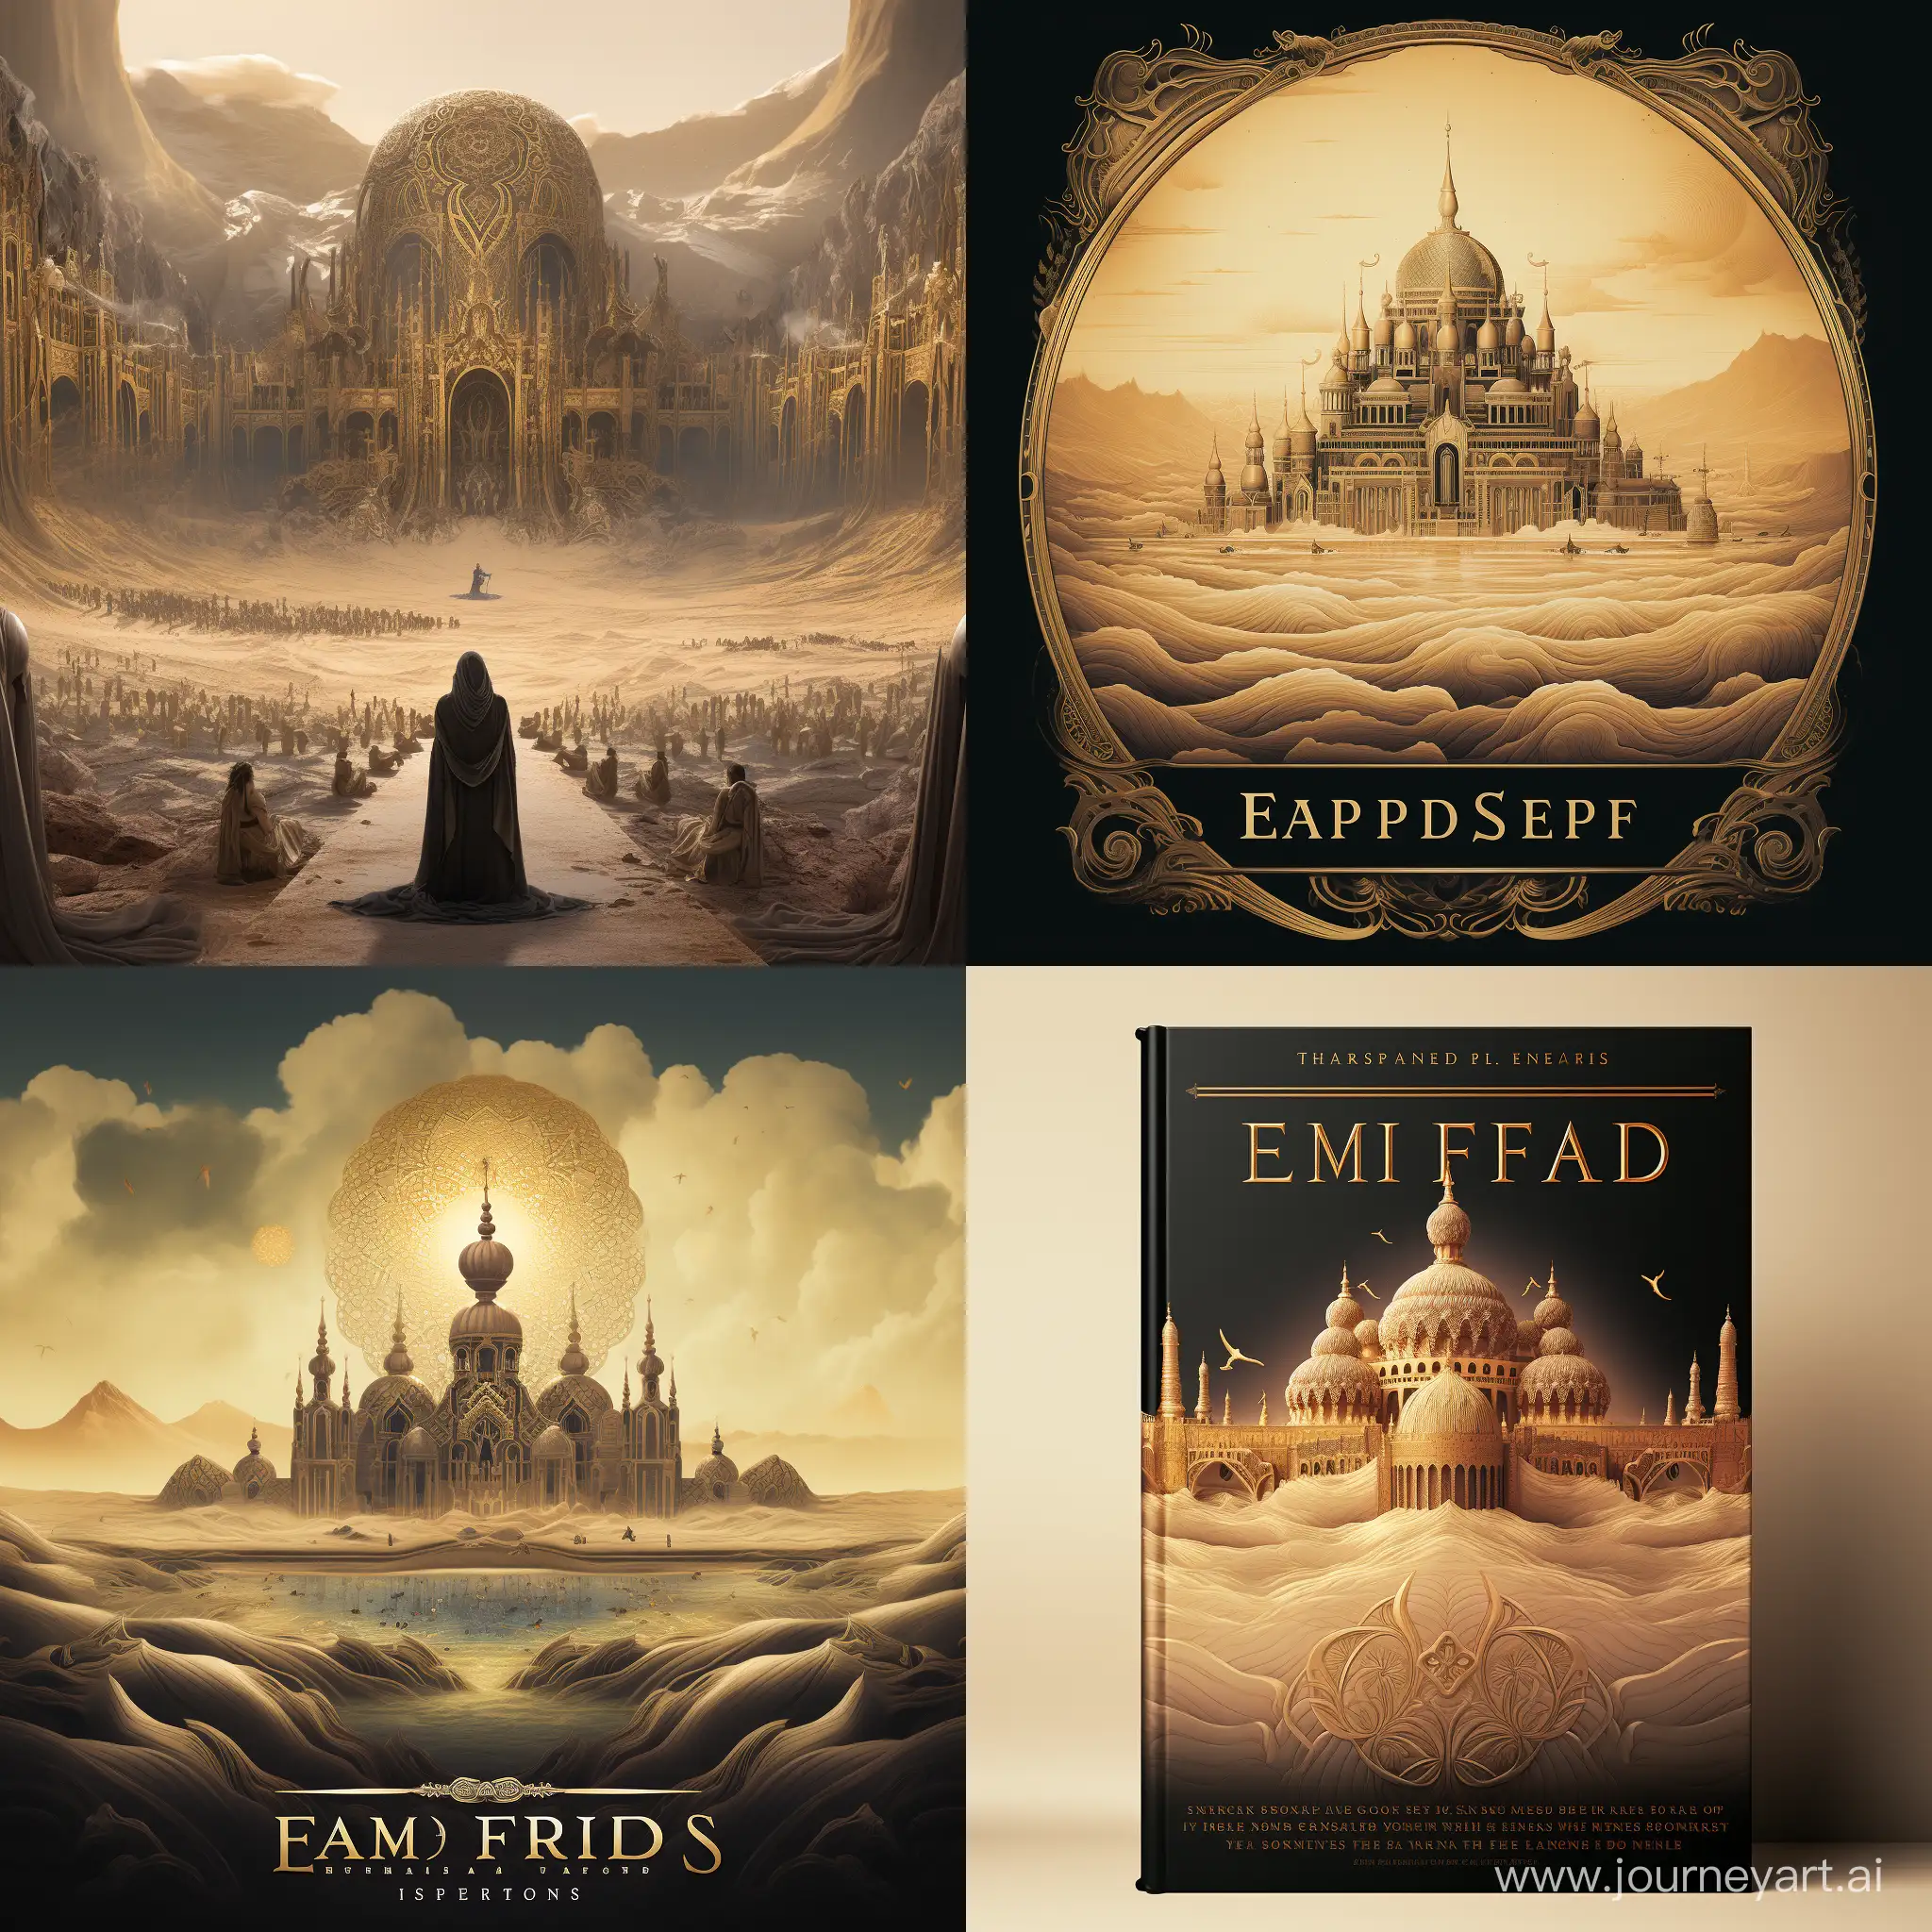 Majestic-Empire-of-Sands-Artwork-with-Intricate-Details